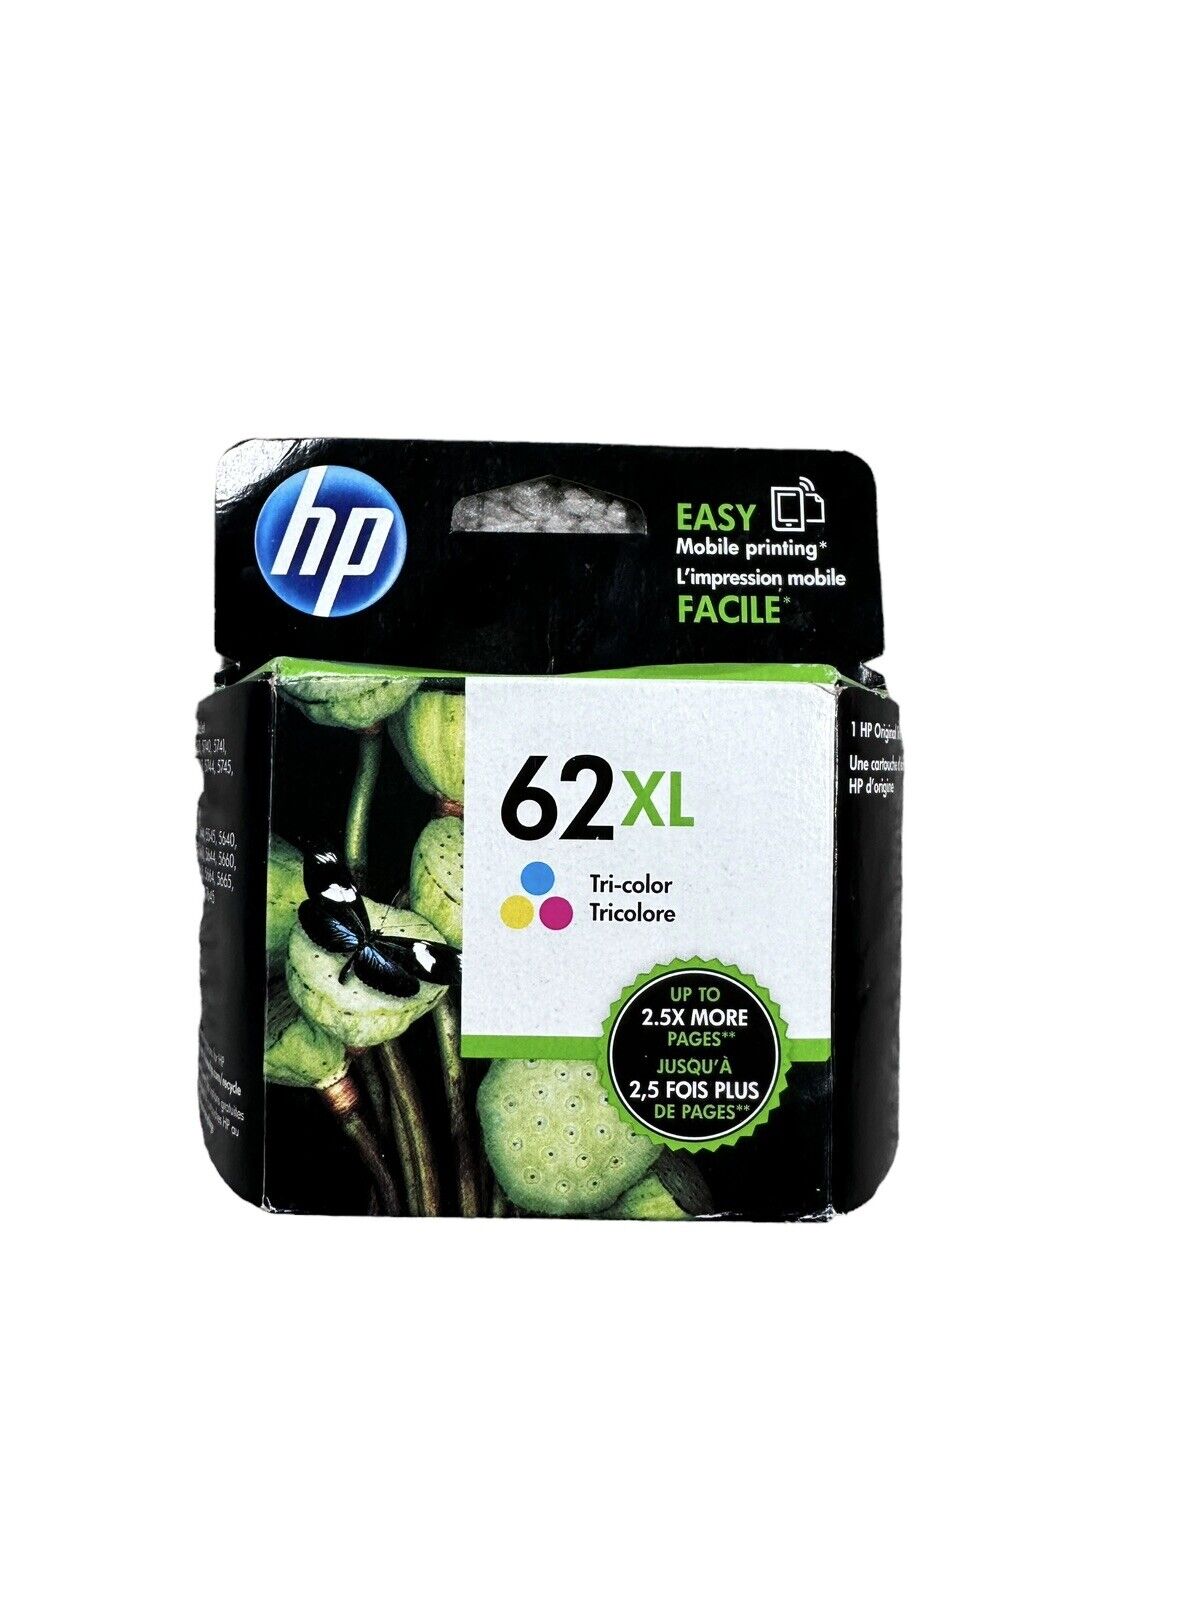 Geniune HP 62 XL Tri-Color Ink Cartridge C2P07AN (Expired 4/19) Brand New